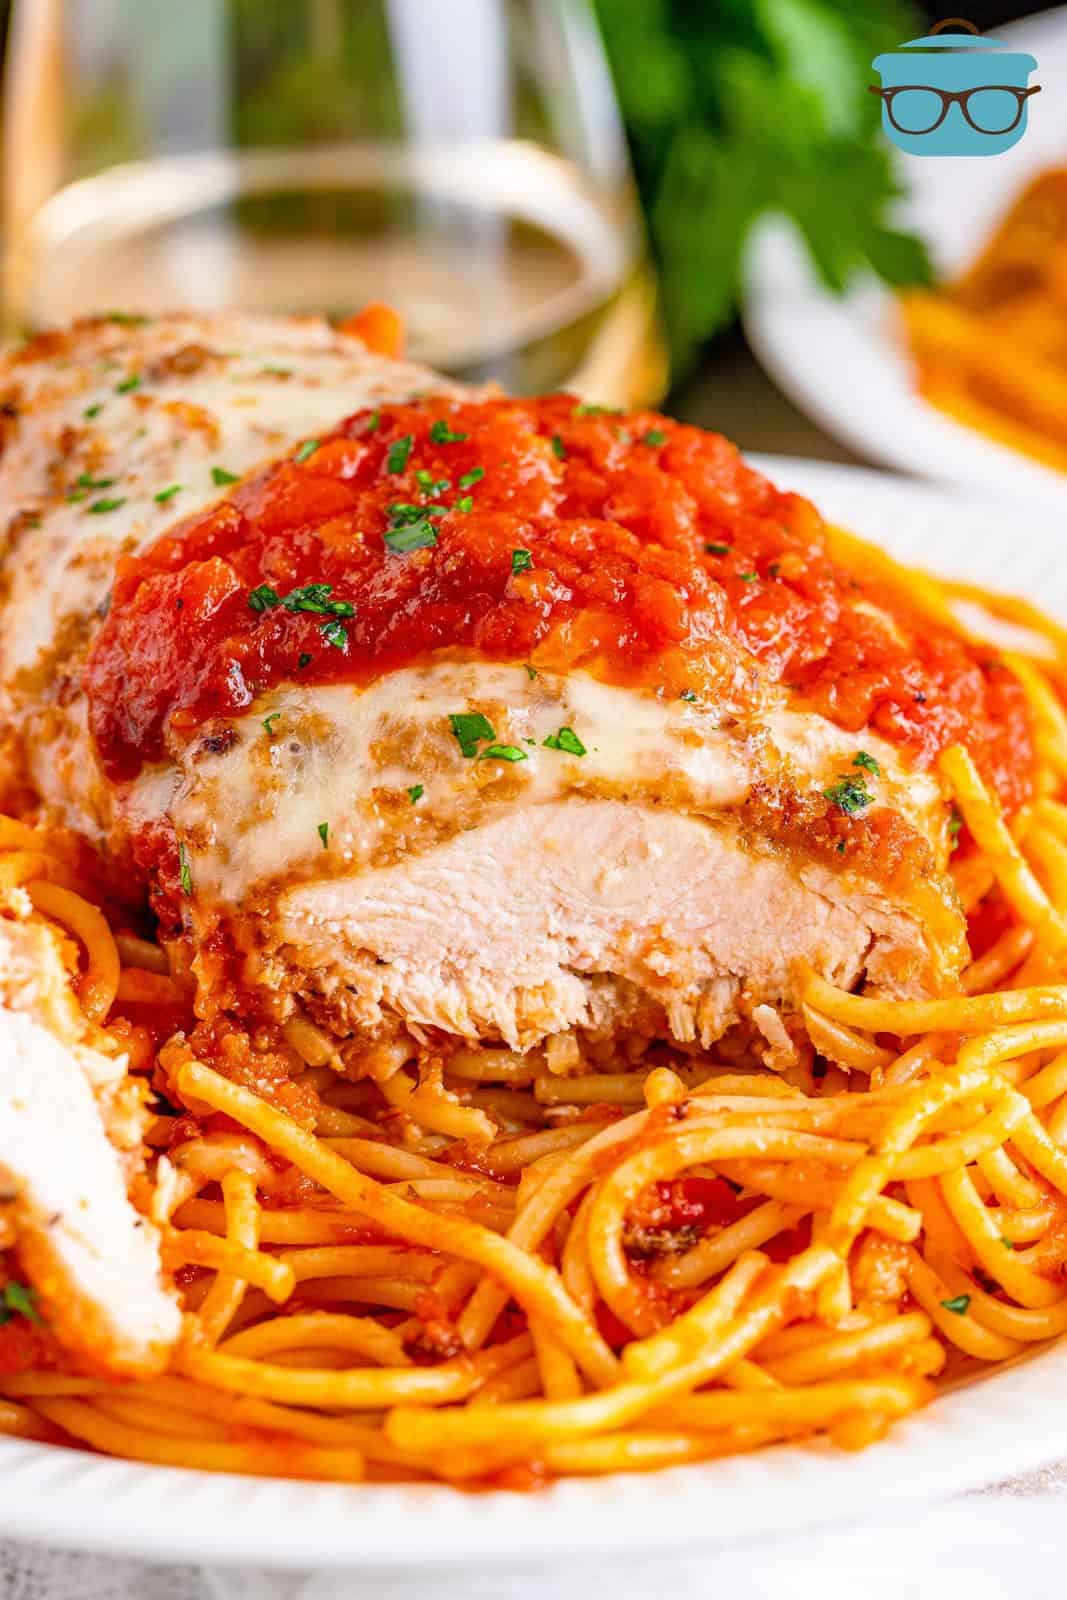 sliced of chicken breast served over spaghetti with sauce.